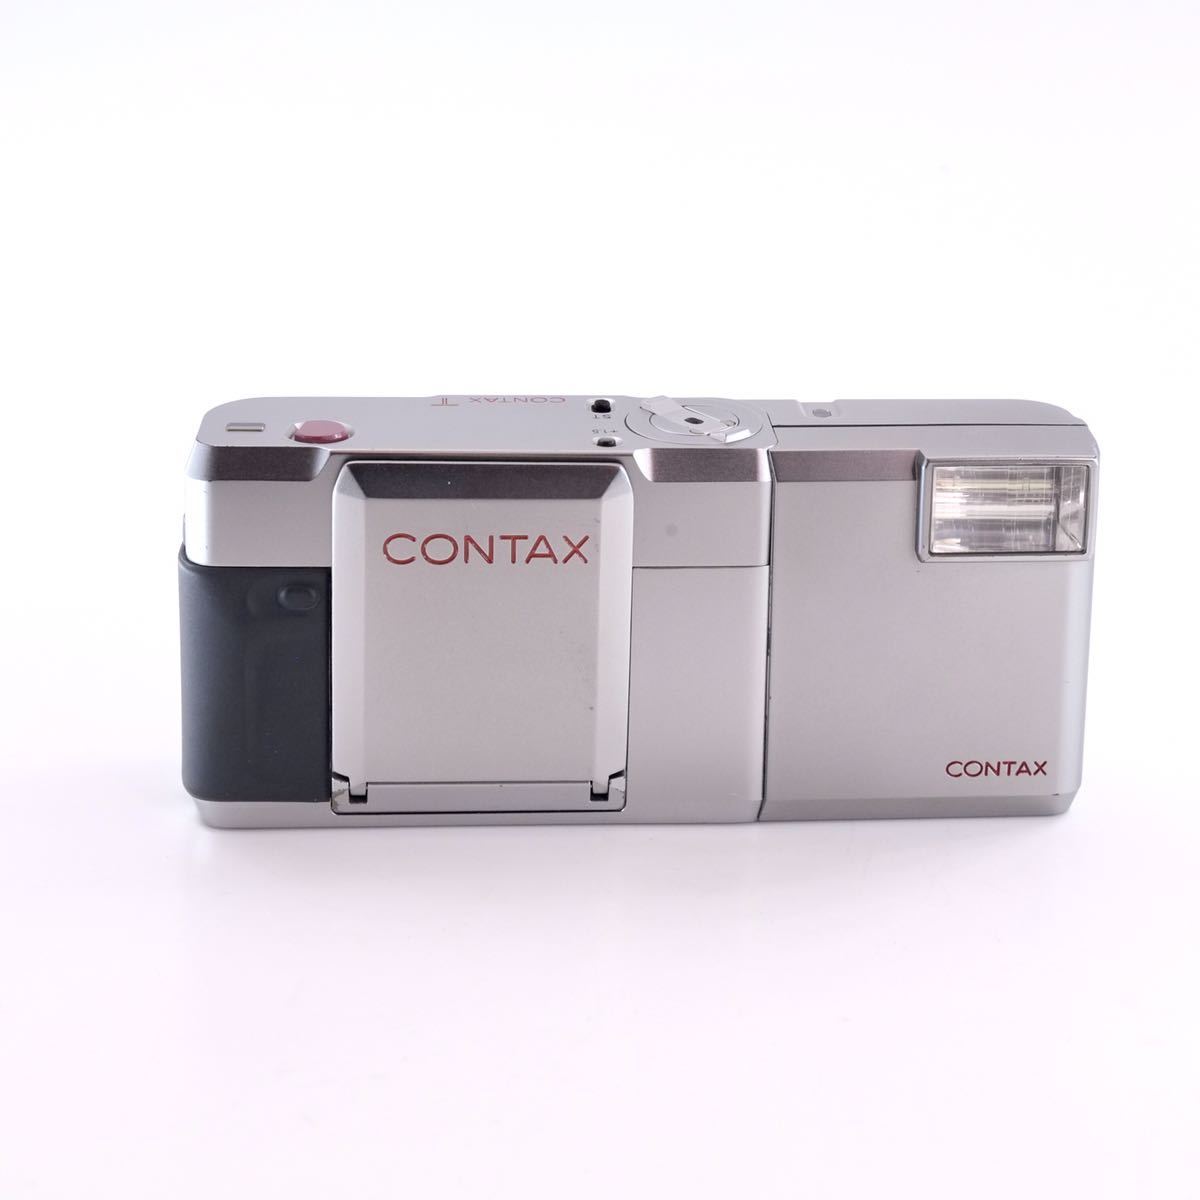 CONTAX コンタックス　初代 T Caiss Zeiss Sonnar 38mm 1:2.8 T* フラッシュ付き